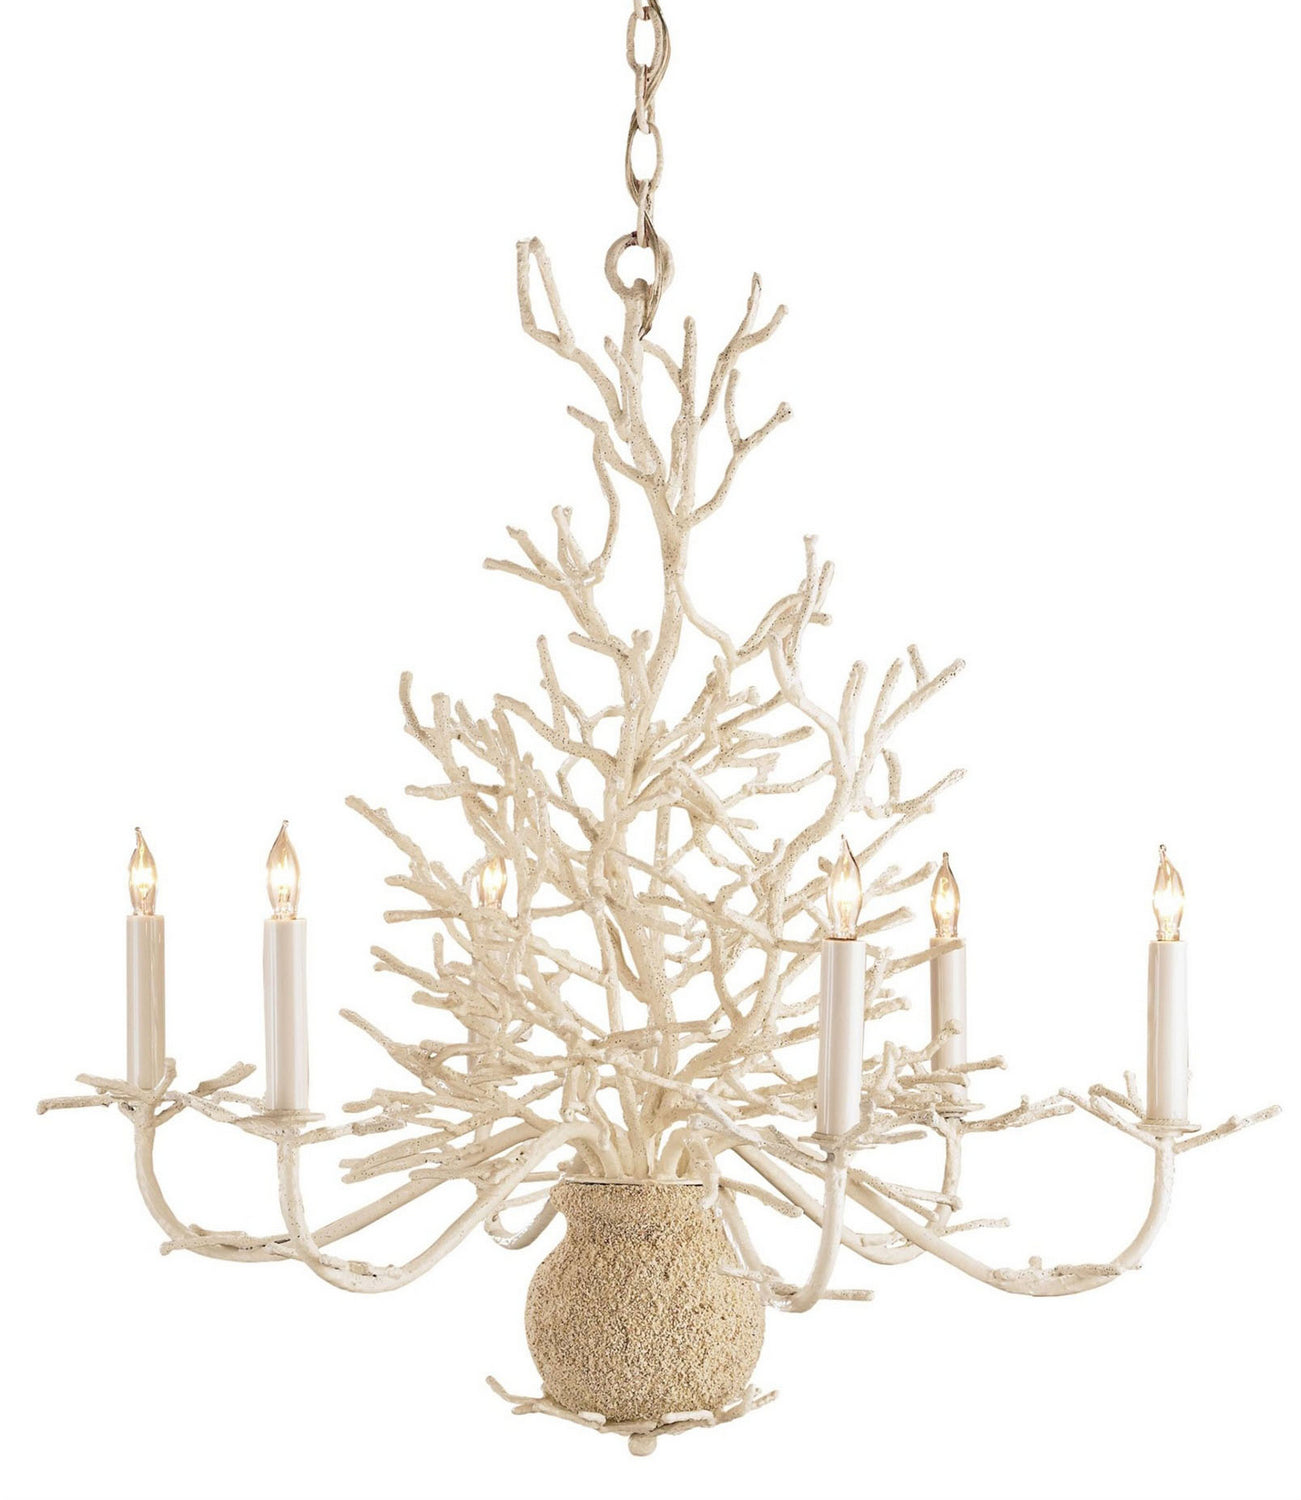 Six Light Chandelier from the Seaward collection in White Coral/Natural Sand finish